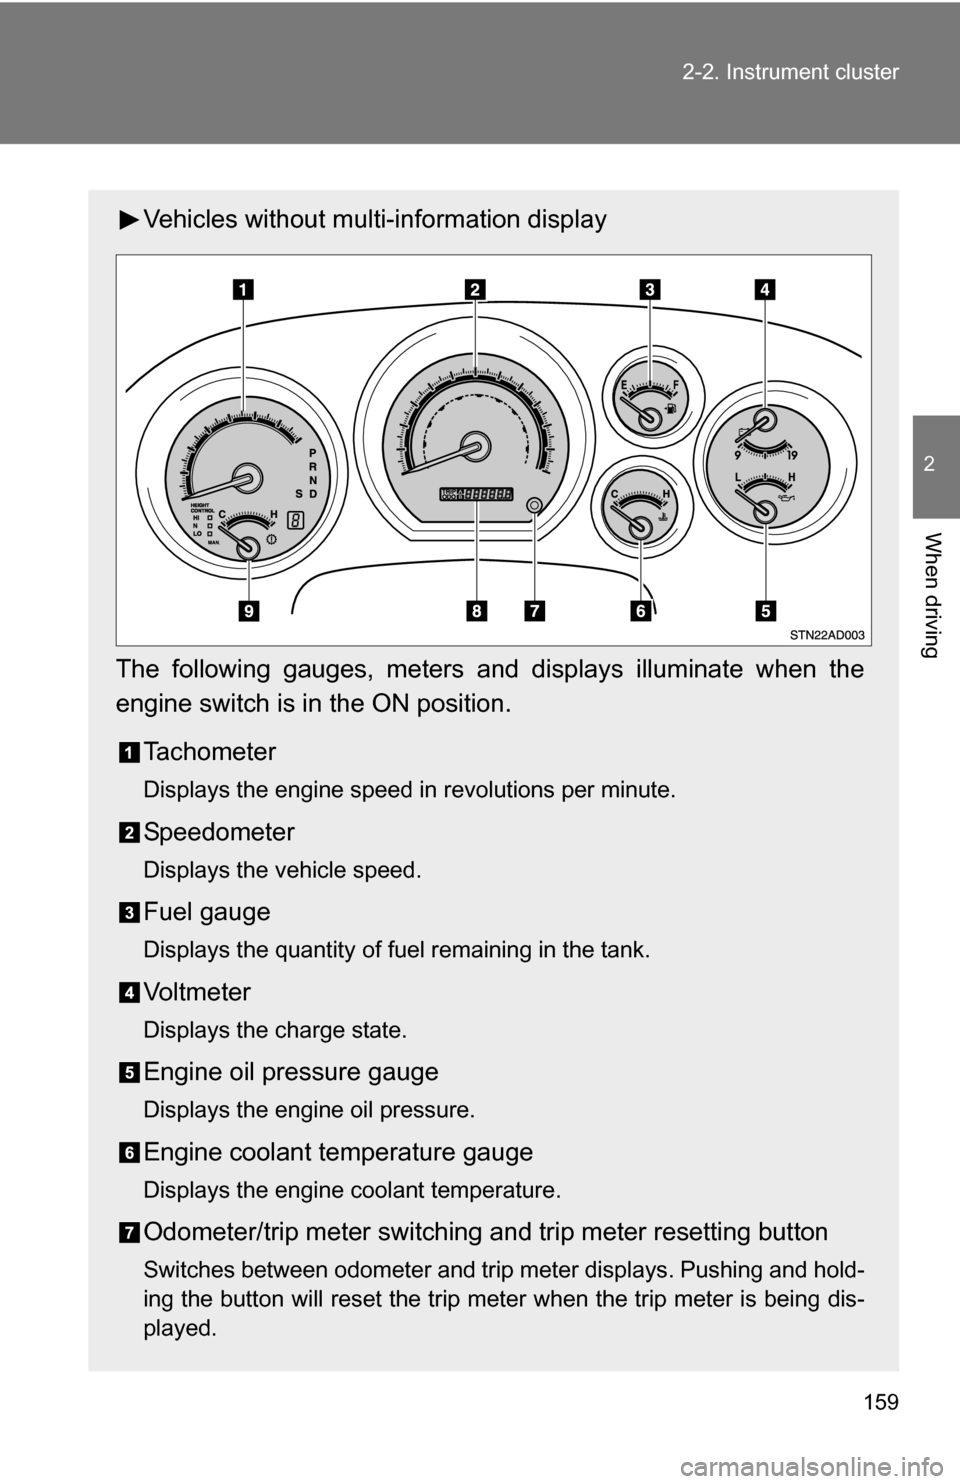 TOYOTA SEQUOIA 2008 2.G Owners Manual 159
2-2. Instrument cluster
2
When driving
Vehicles without multi-information display
The following gauges, meters and displays illuminate when the
engine switch is in the ON position. Tachometer
Disp